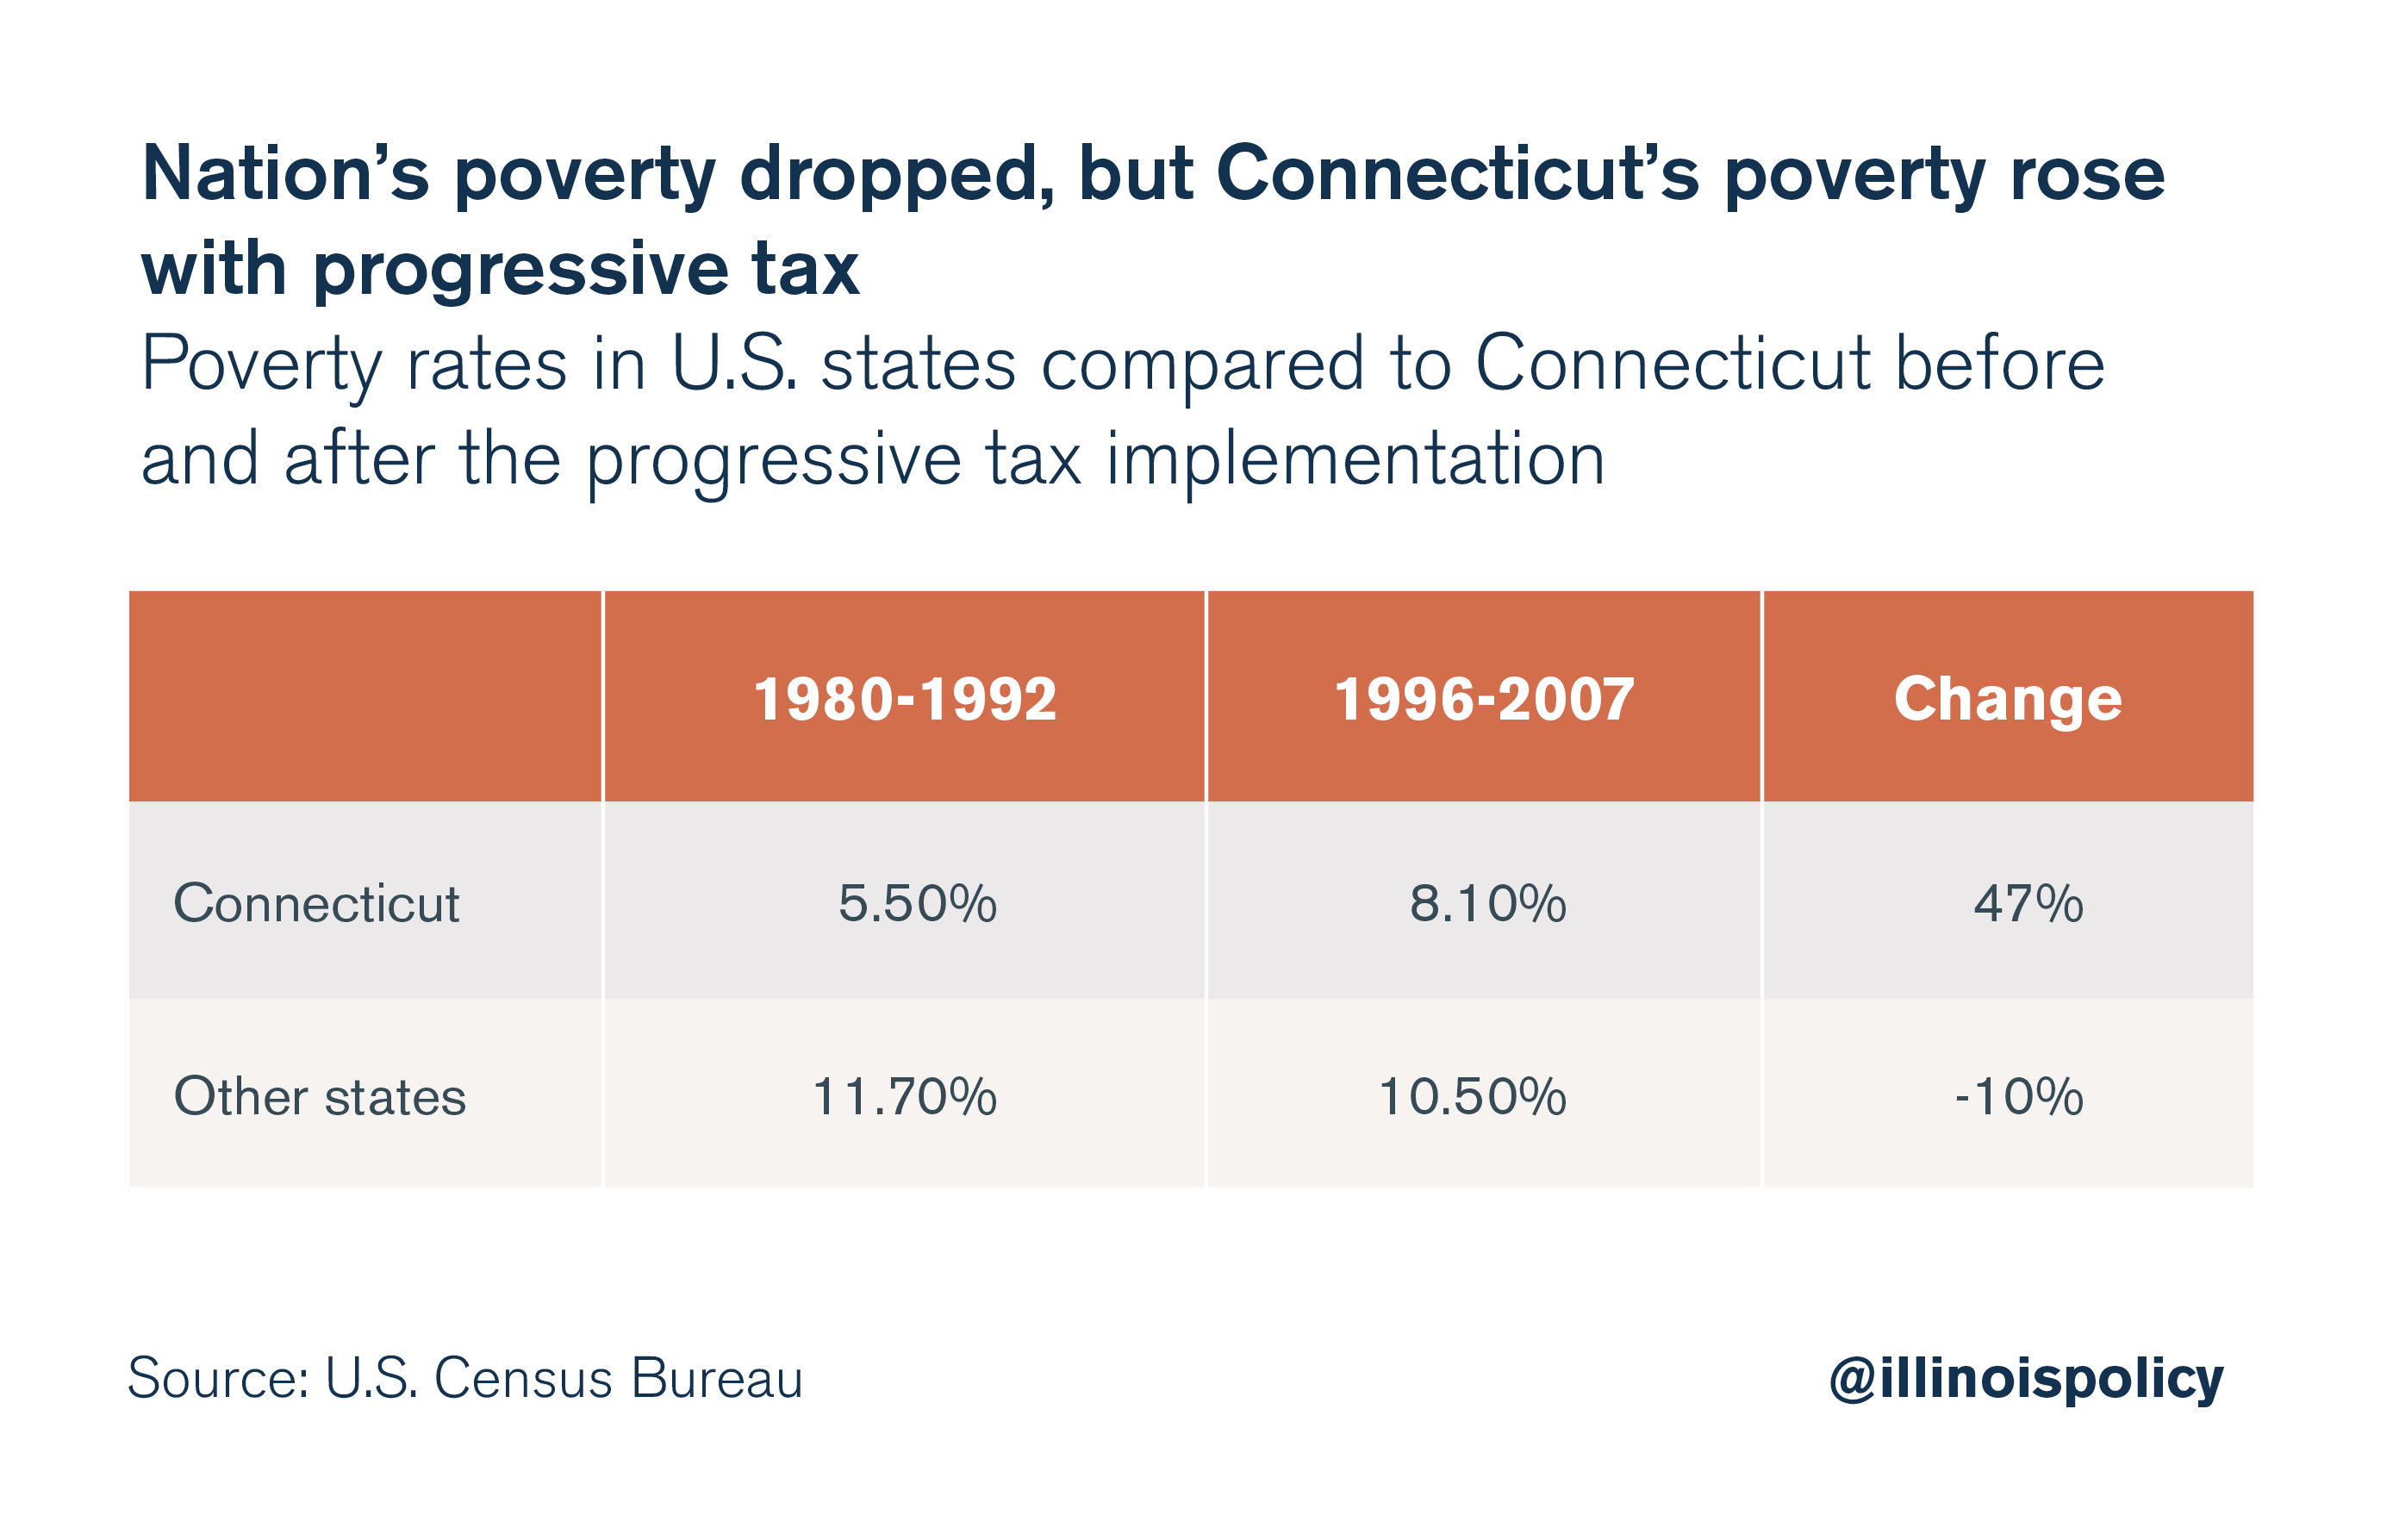 Nation's poverty dropped but Connecticut's poverty rose with progressive tax